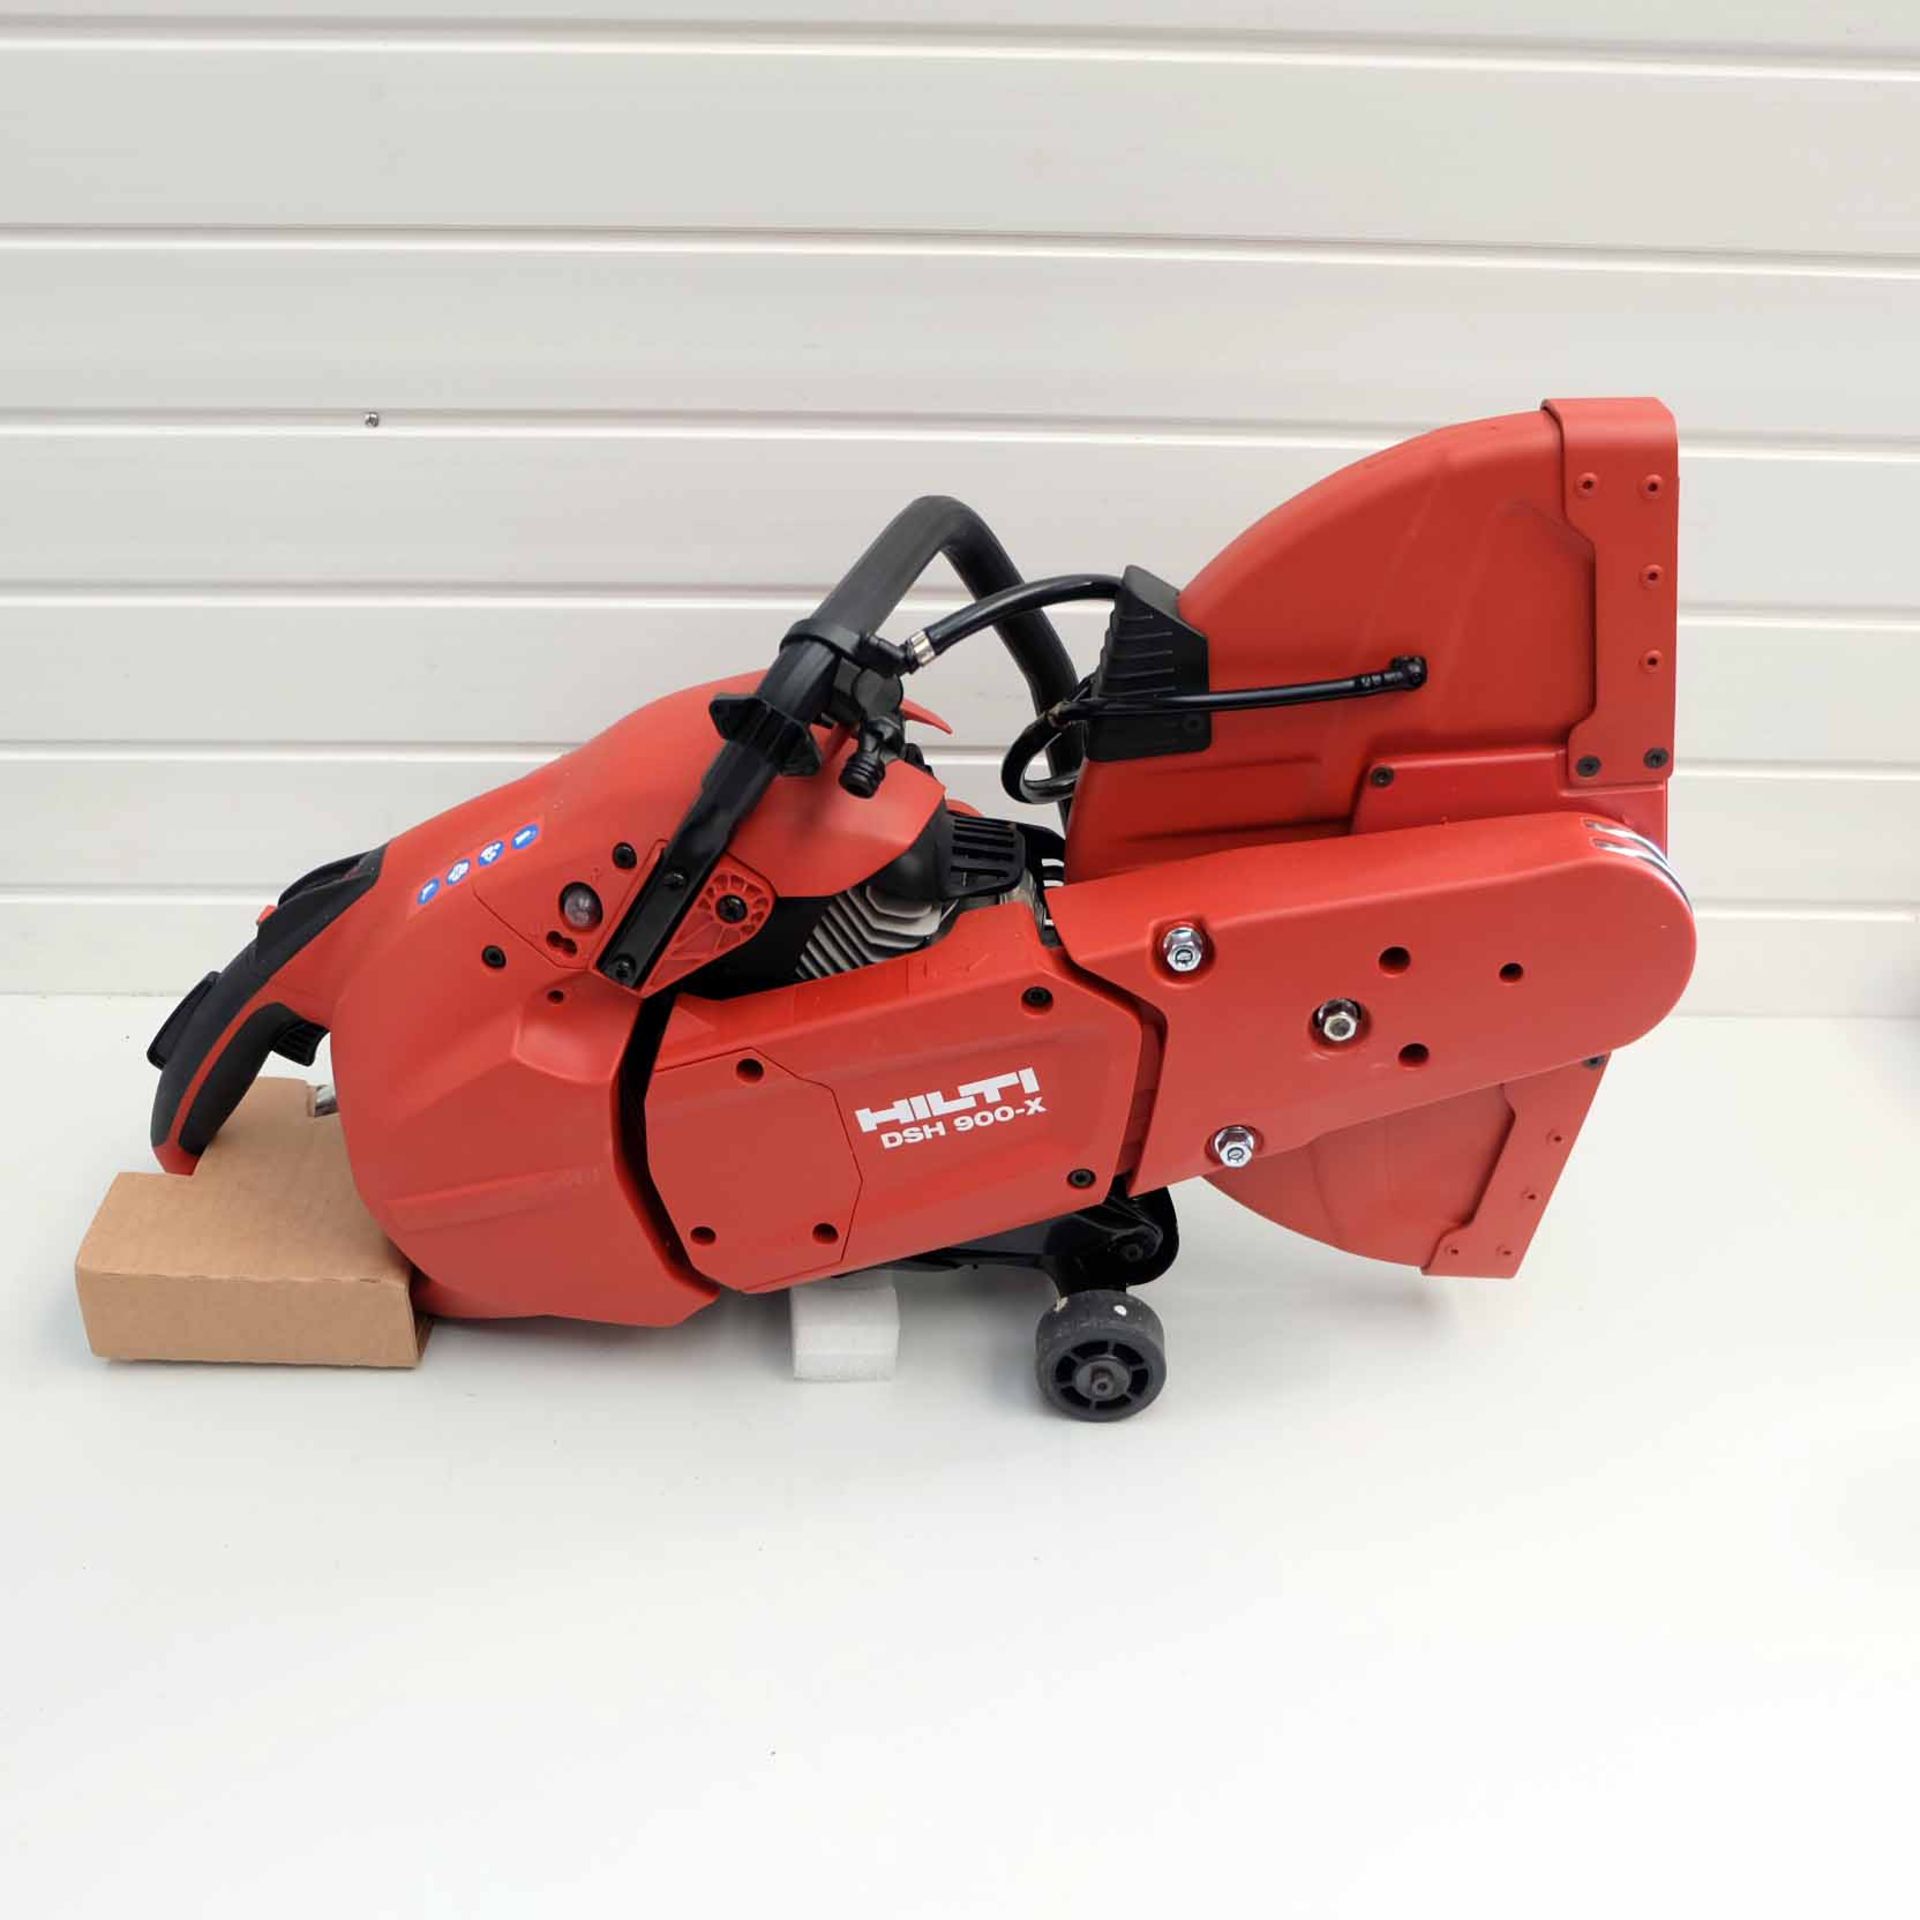 Hilti Hand Held Gas Saw. Model DSH 900-X 16". Complete With SP-16"x1" Blade. Easy Start Auto-Choke S - Image 2 of 25